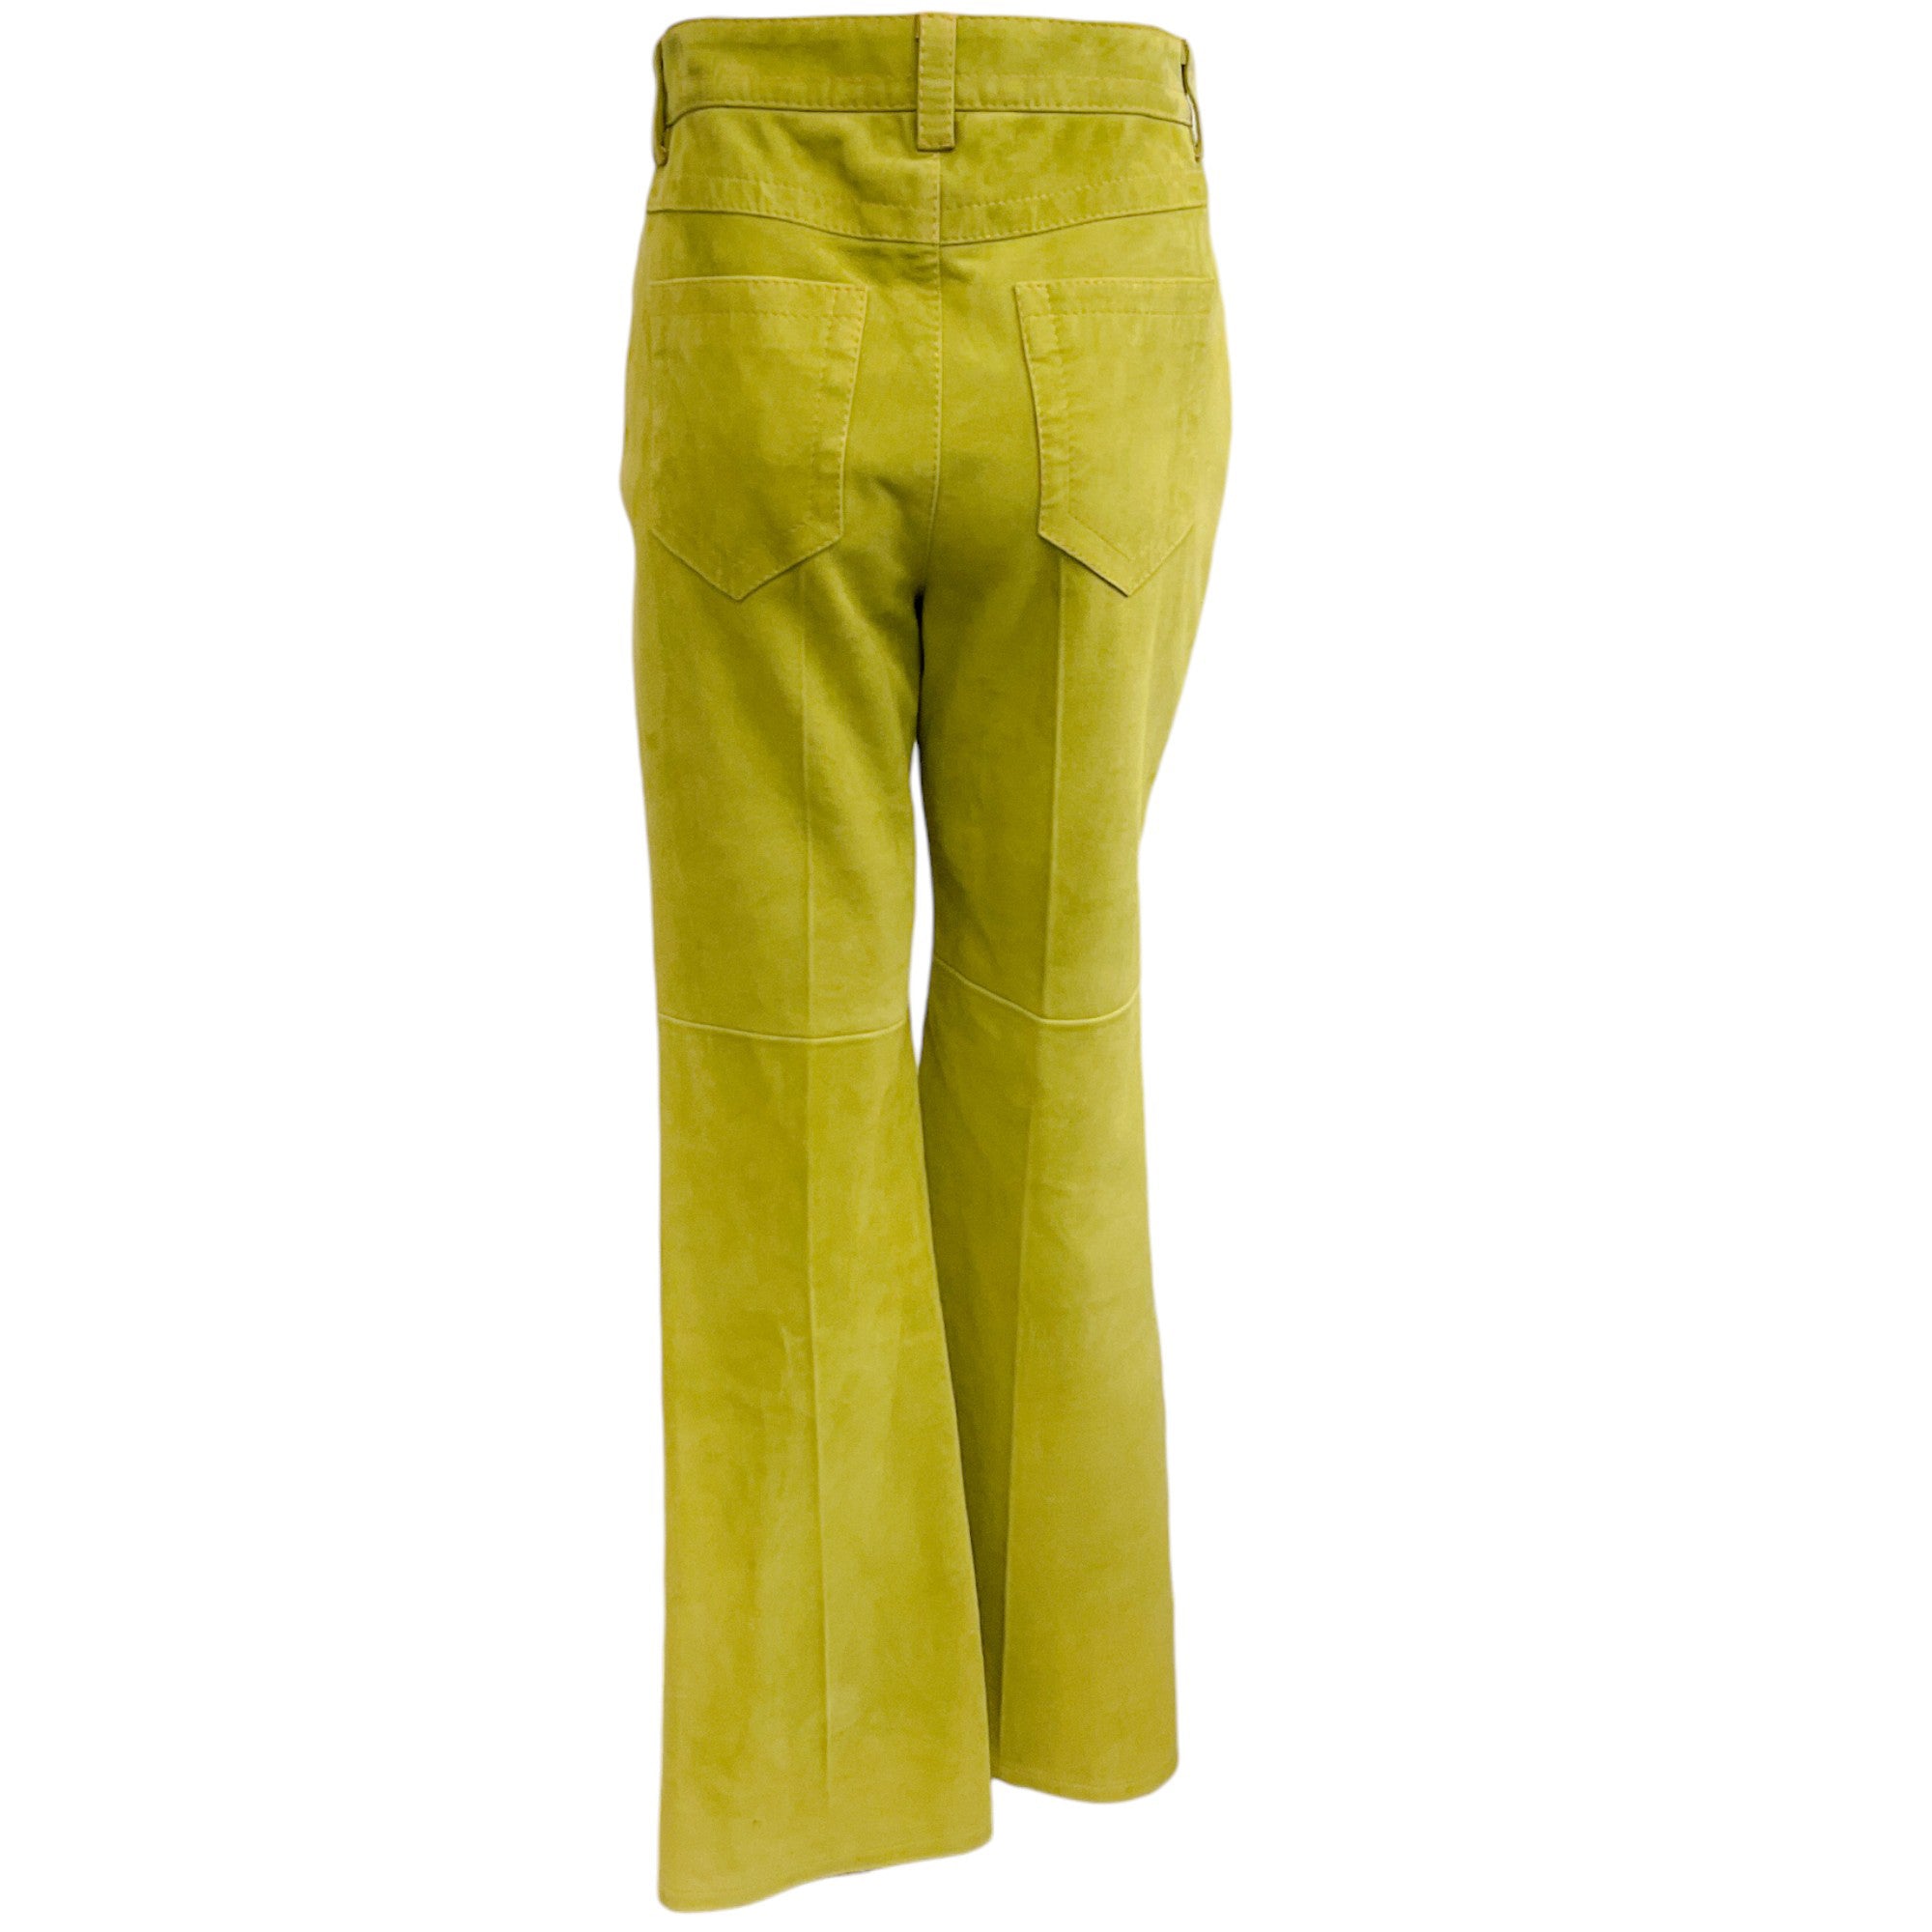 Marni Lime Green Suede Pants